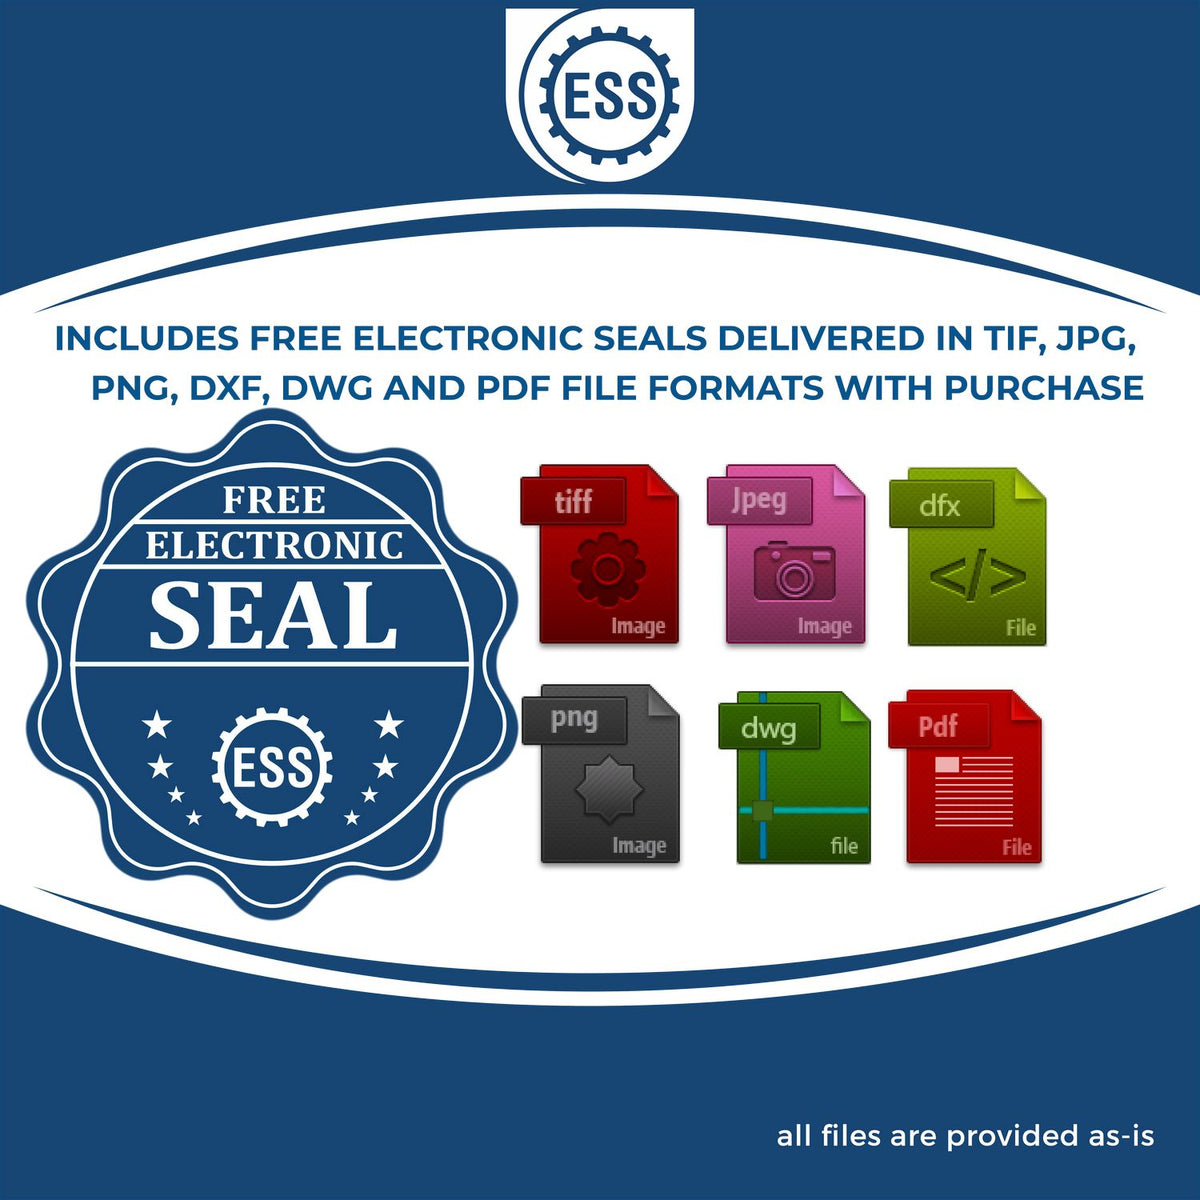 An infographic for the free electronic seal for the Long Reach Maryland Geology Seal illustrating the different file type icons such as DXF, DWG, TIF, JPG and PNG.